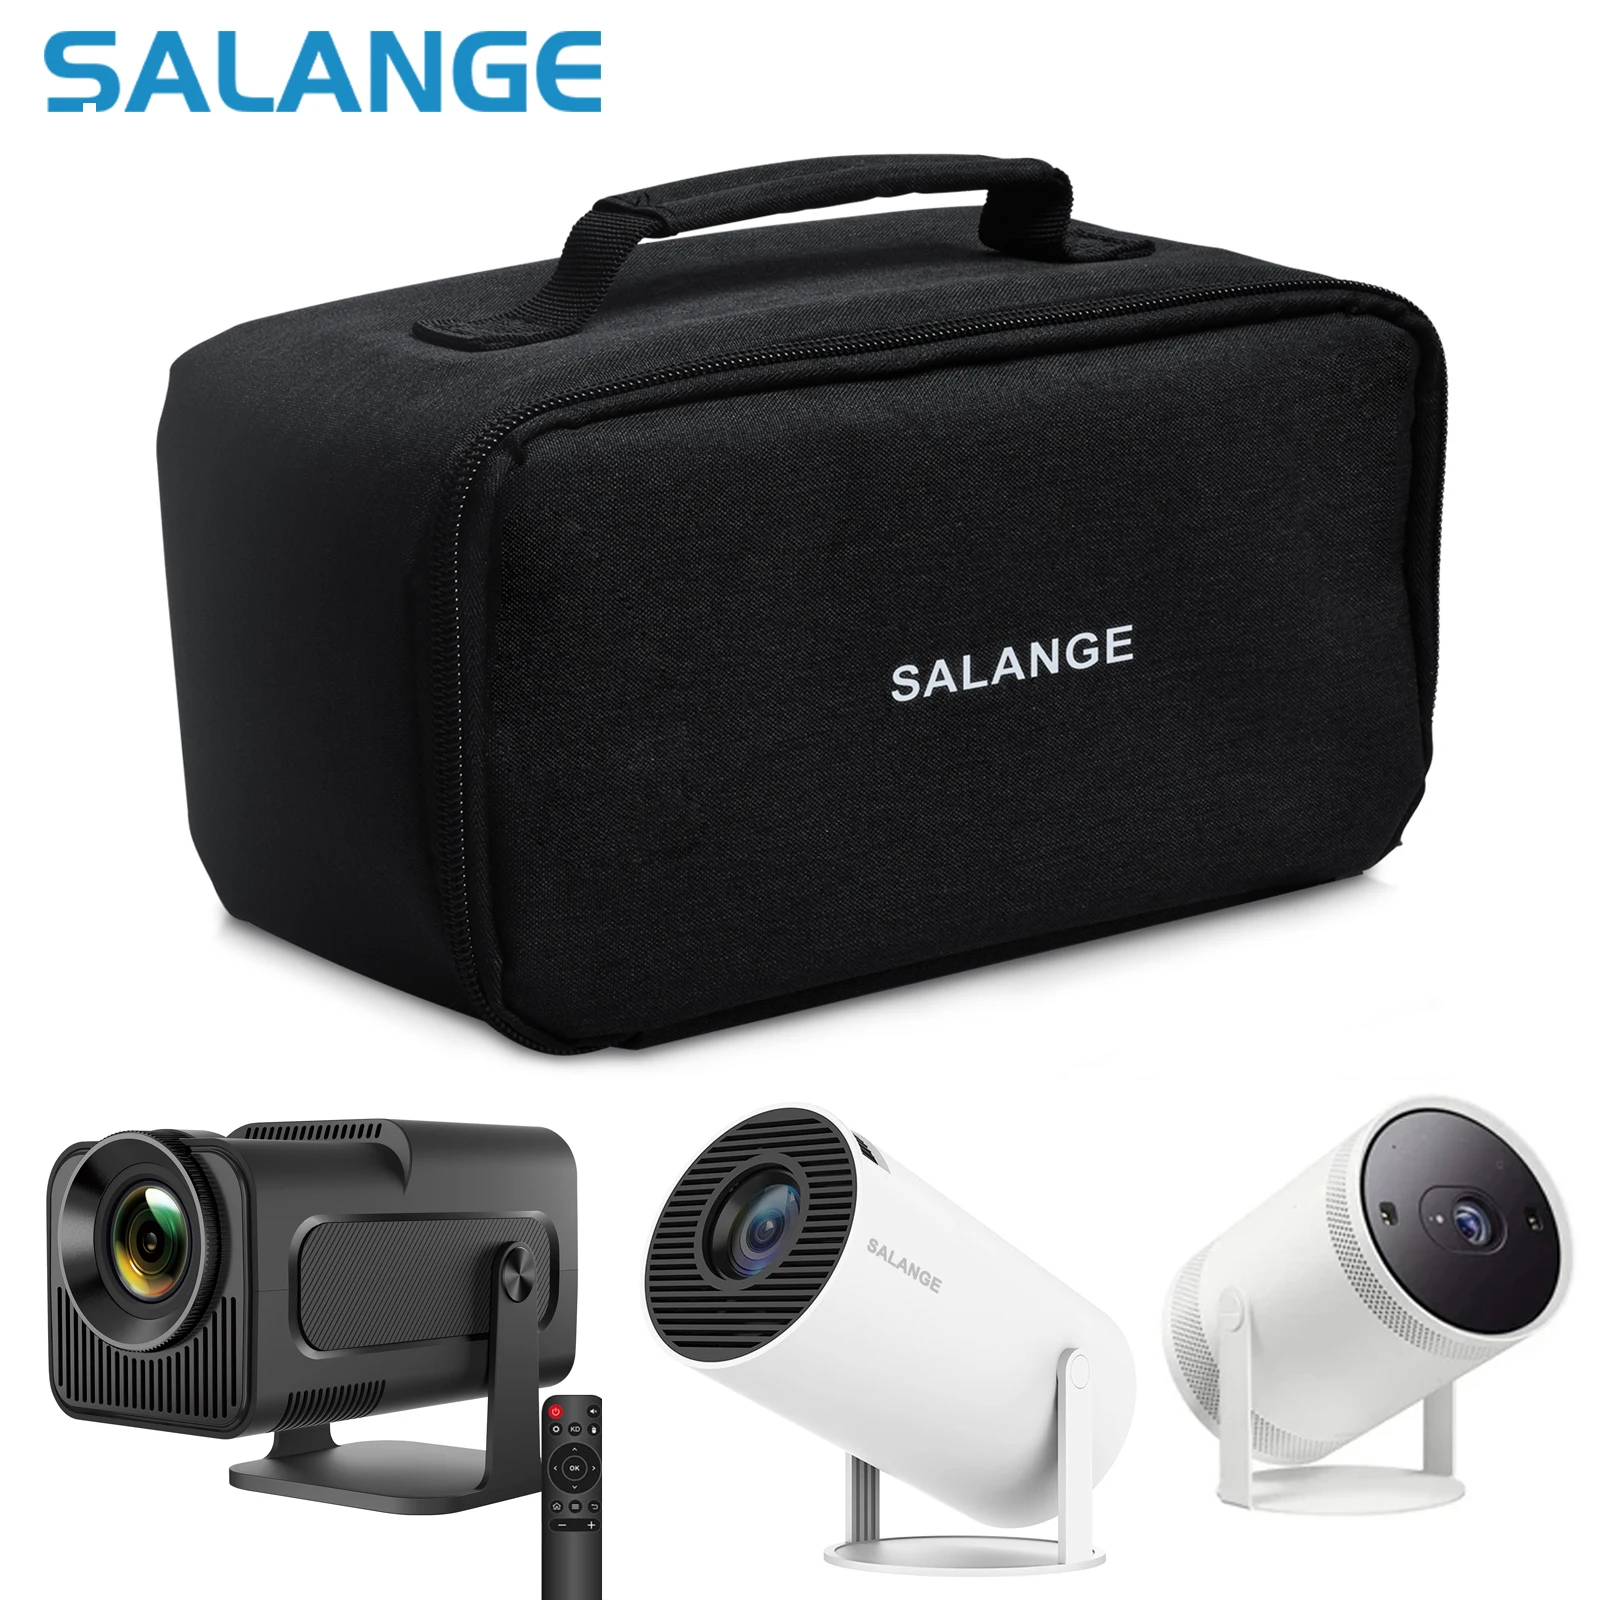 Salange Storage Case Travel Carry Projector Bag for Magcubic HY300 Protector Carrying Bags for HY320&HY320 mini Projector